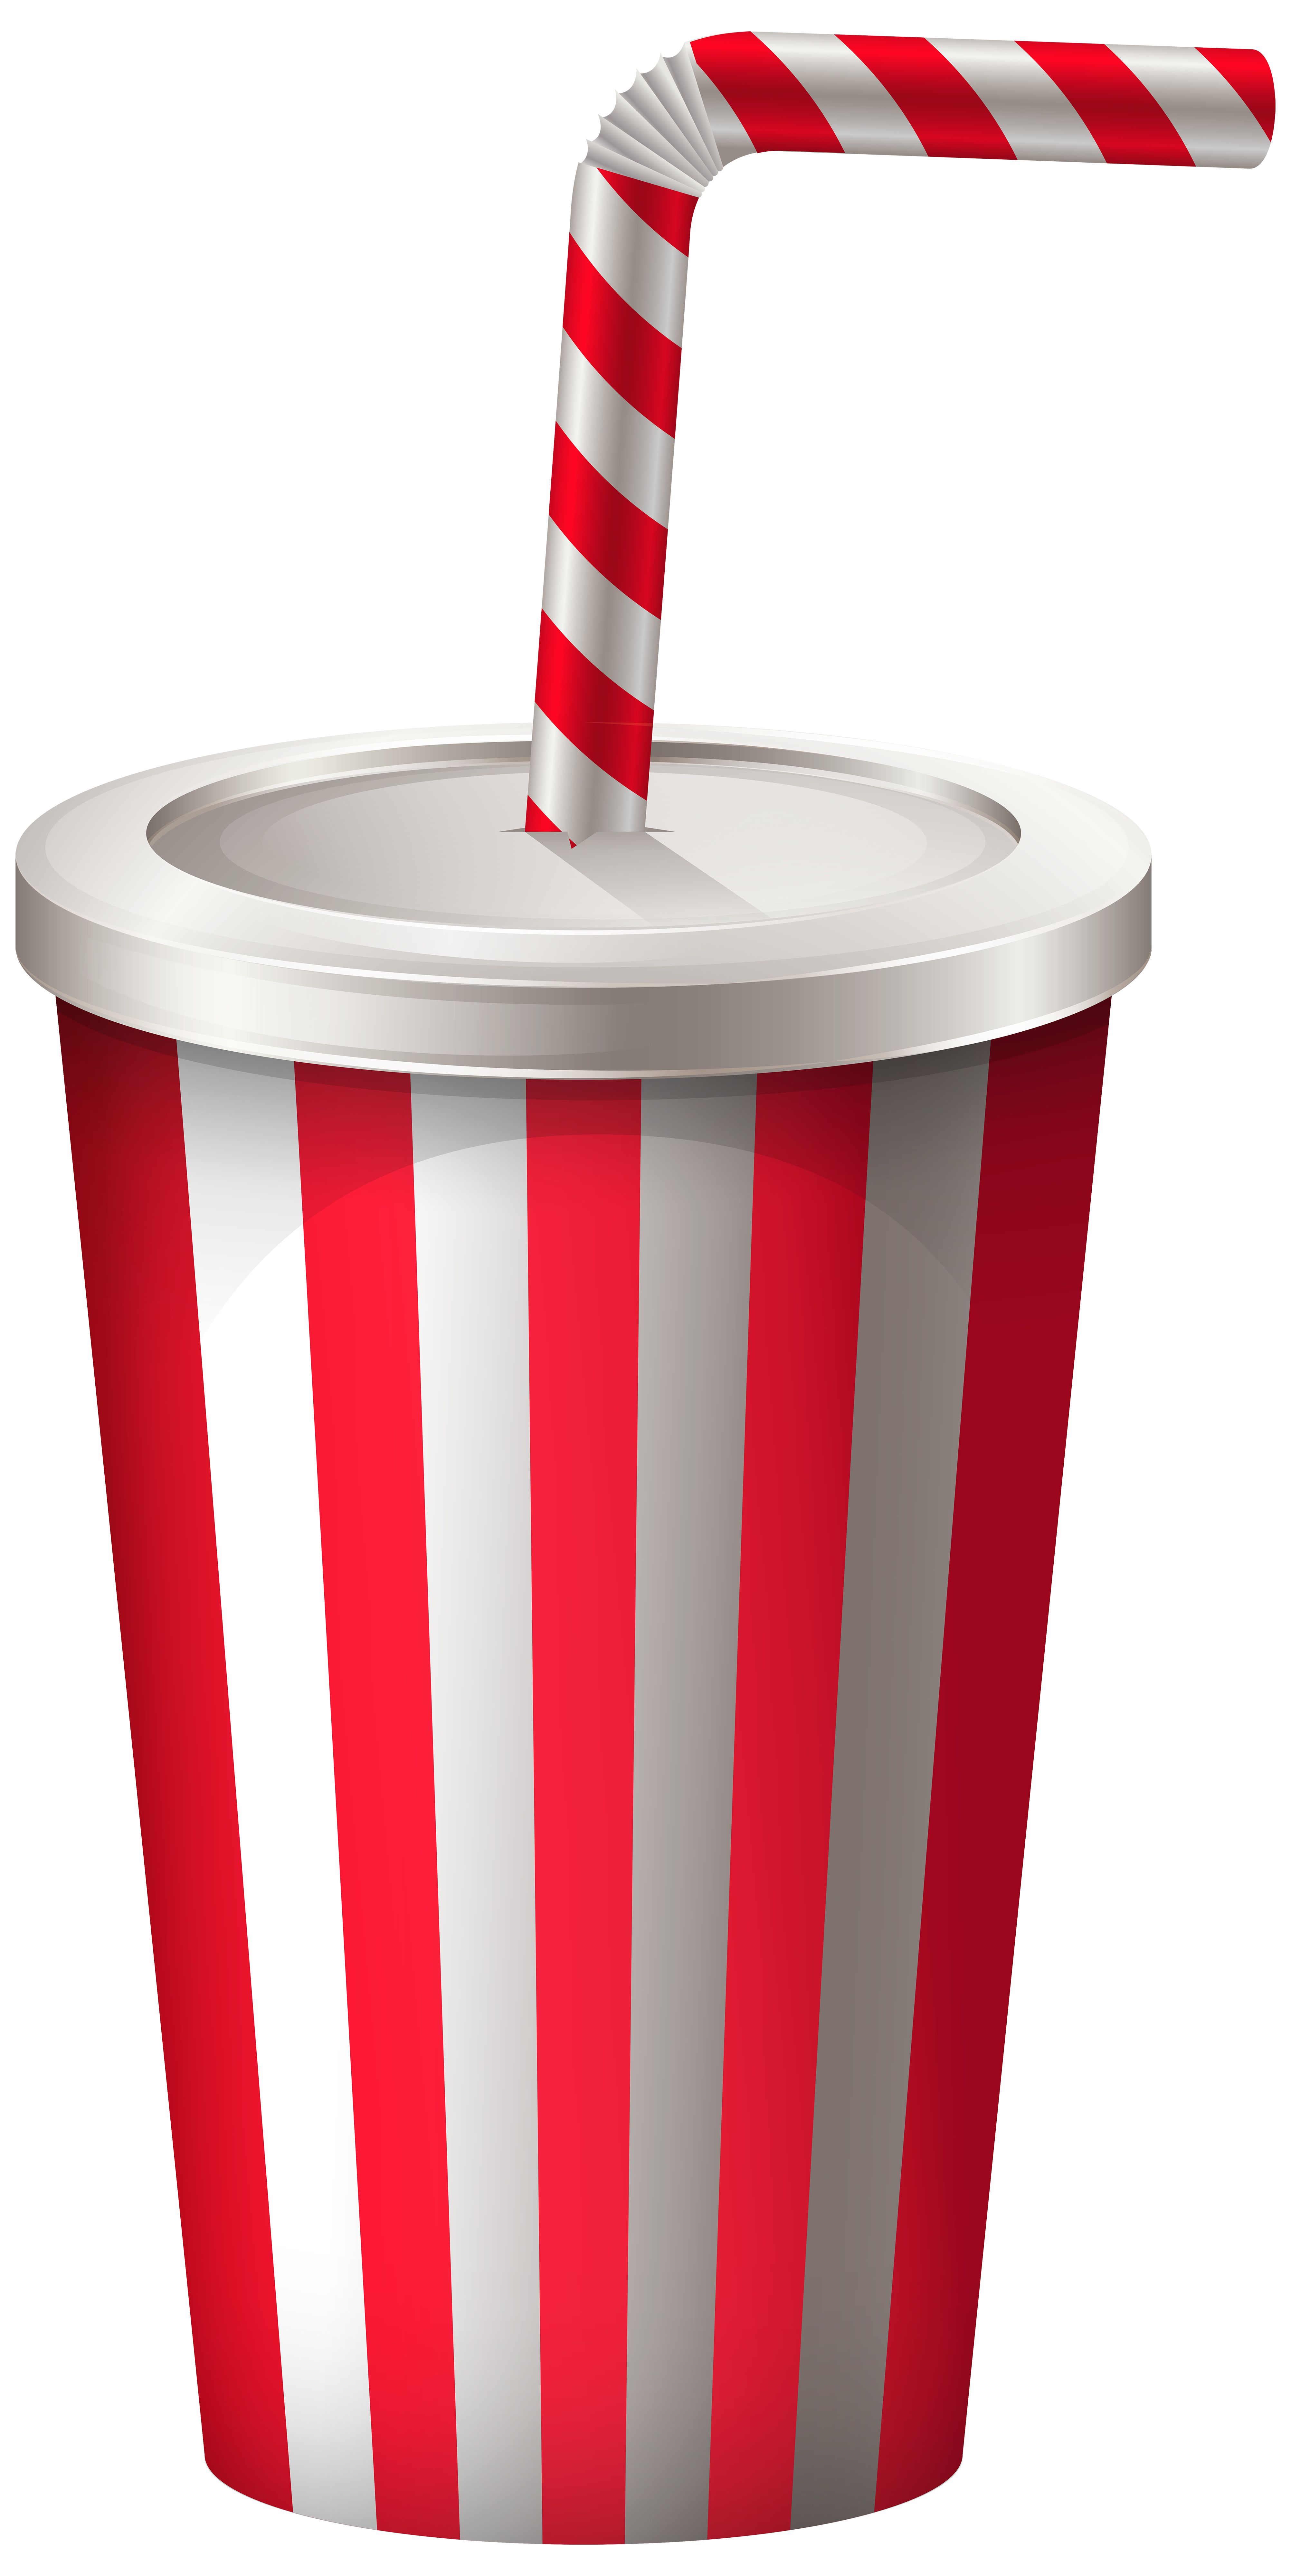 Drink Cup With Straw Png Transparent Clip Art Image Gallery Yopriceville High Quality Images And Transparent Png Free Clipart